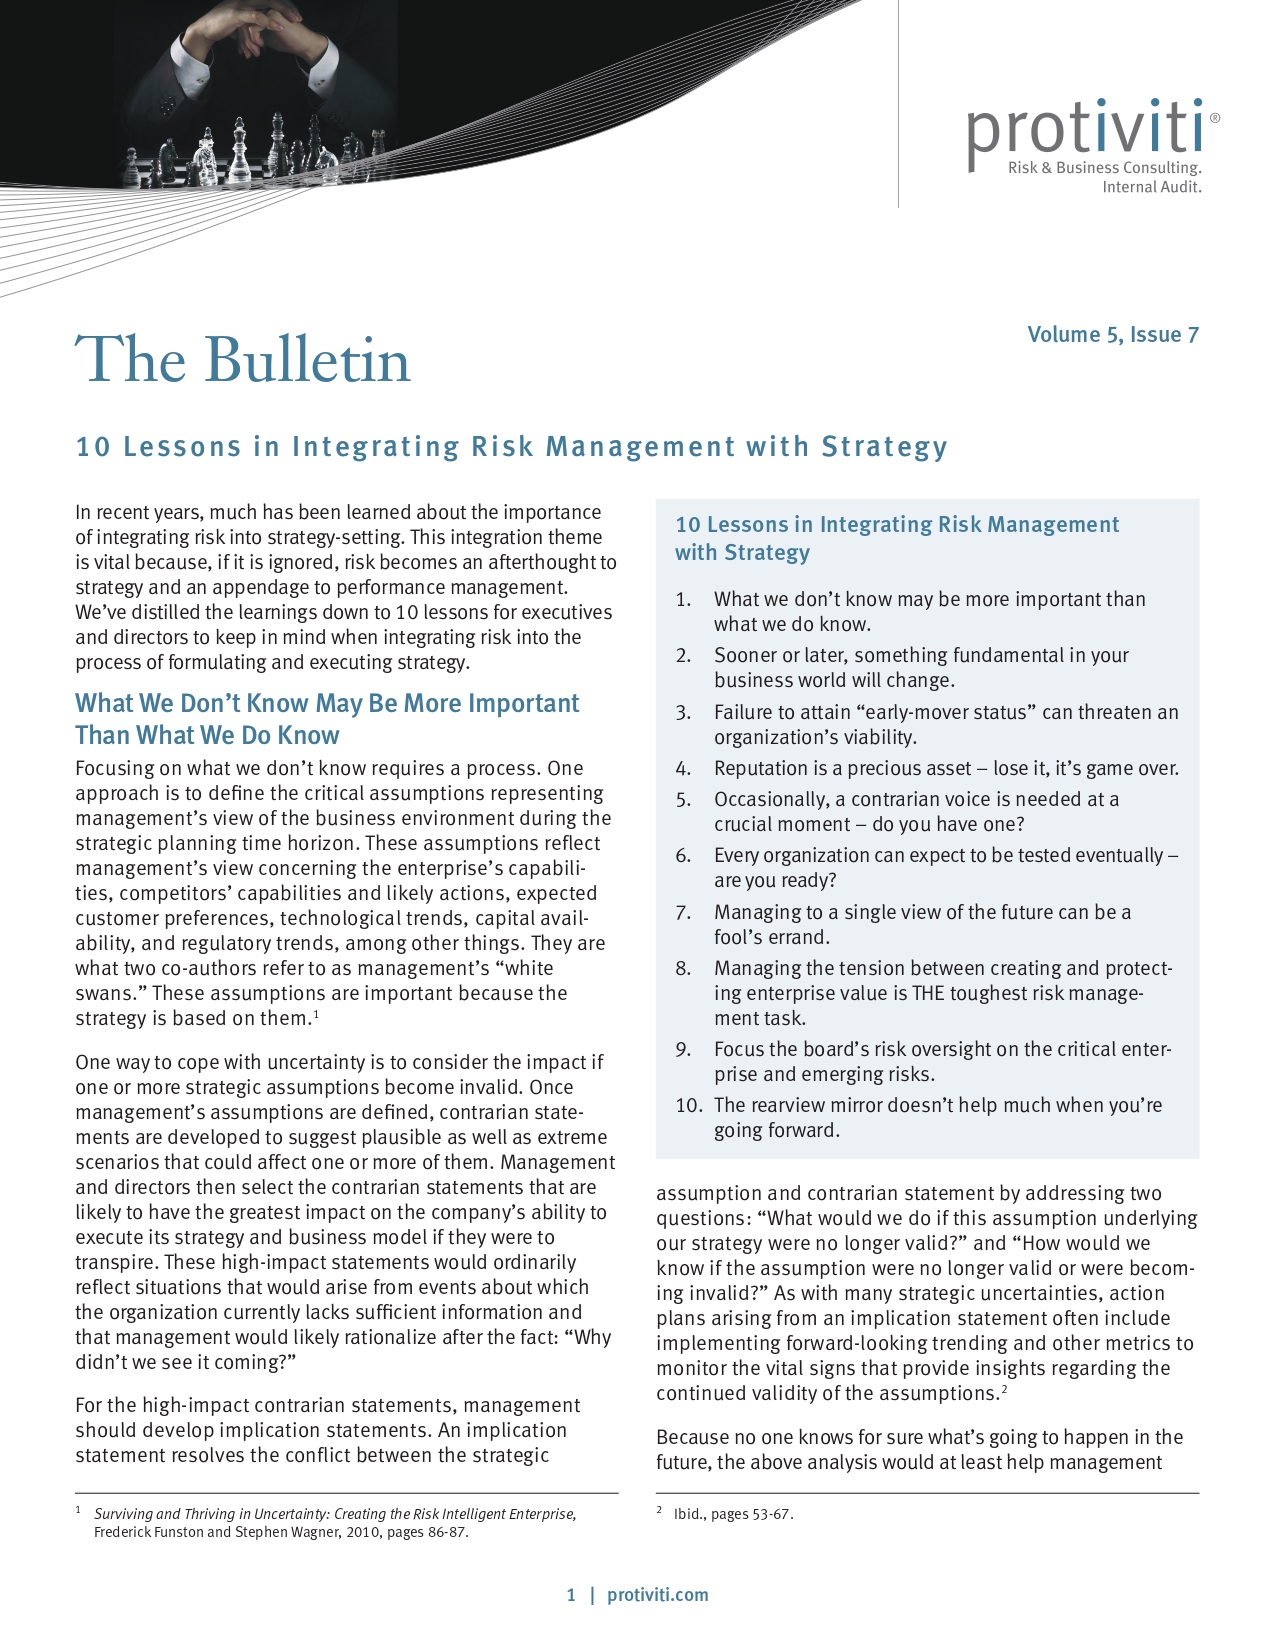 Screenshot of the first page of Ten Lessons in Integrating Risk Management with Strategy